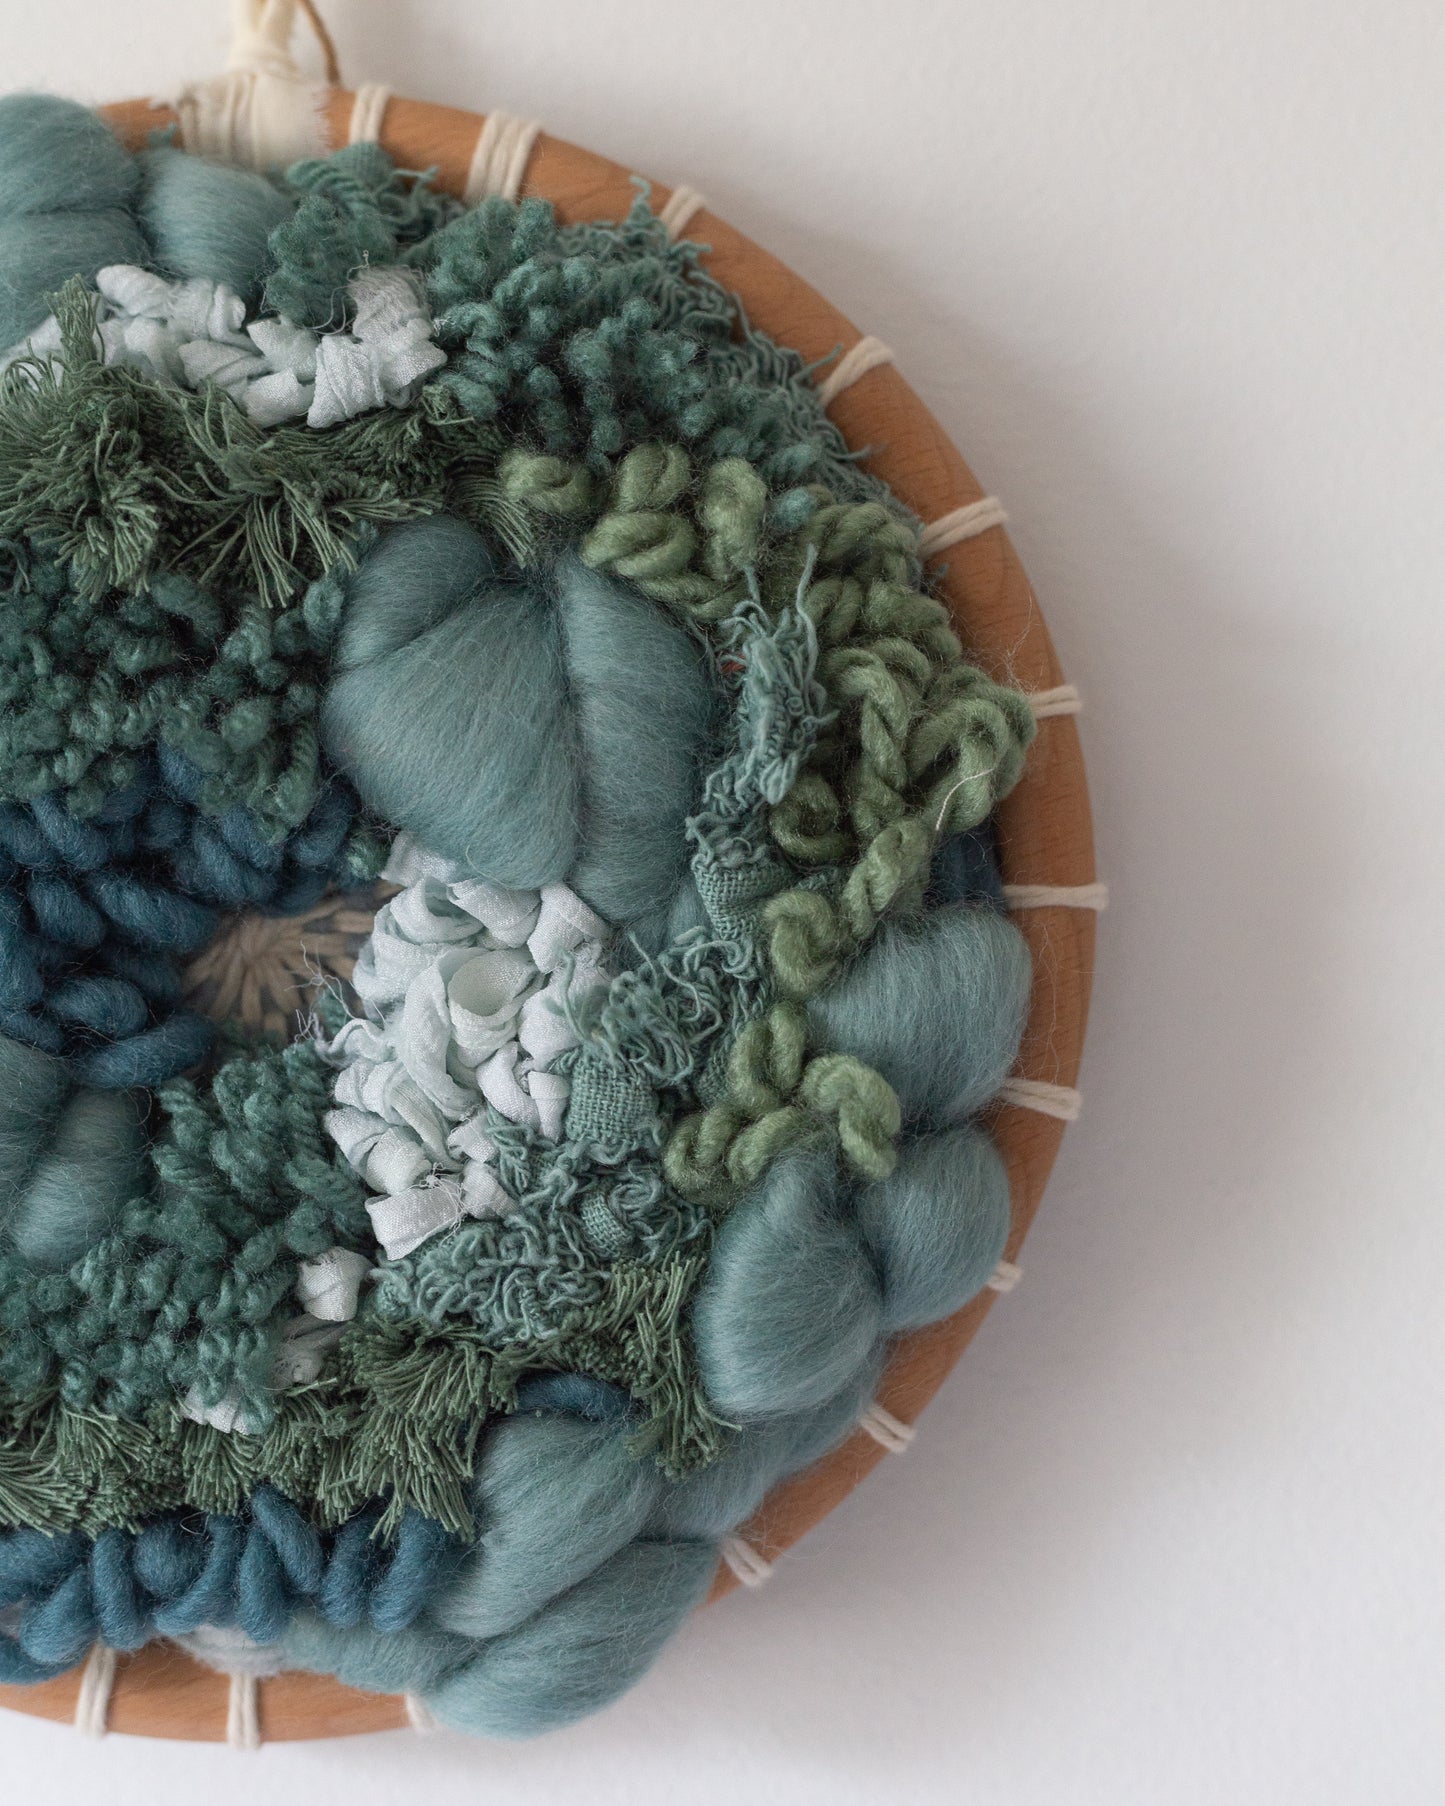 Round Weaving #13 | Woven Wall Hanging